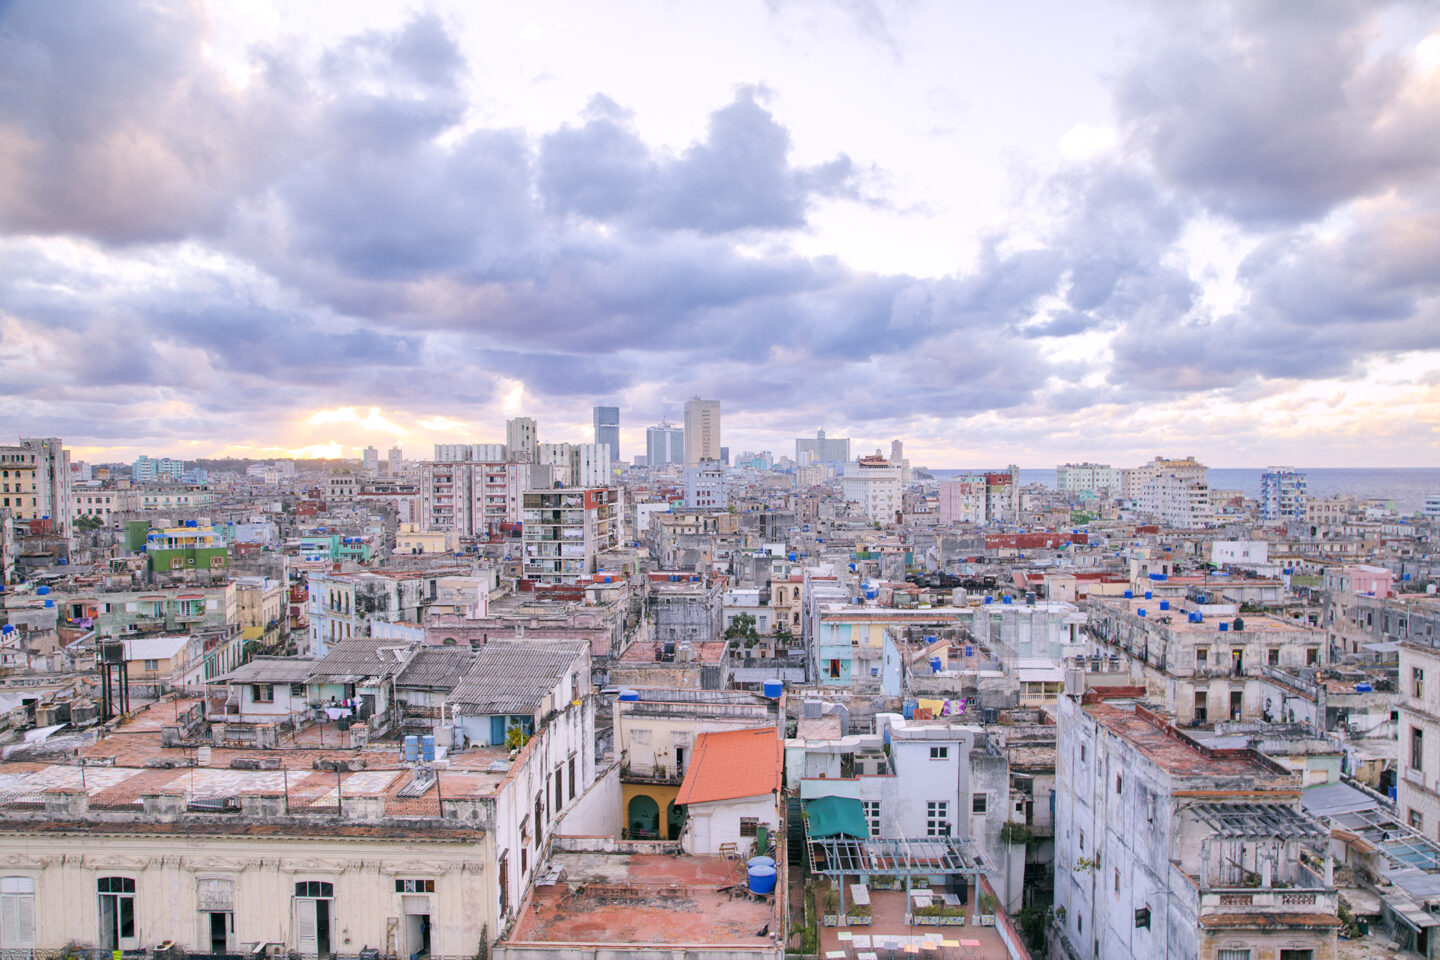 Top 10 List – Havana, Cuba – Things I’ve Learned about this Historic City